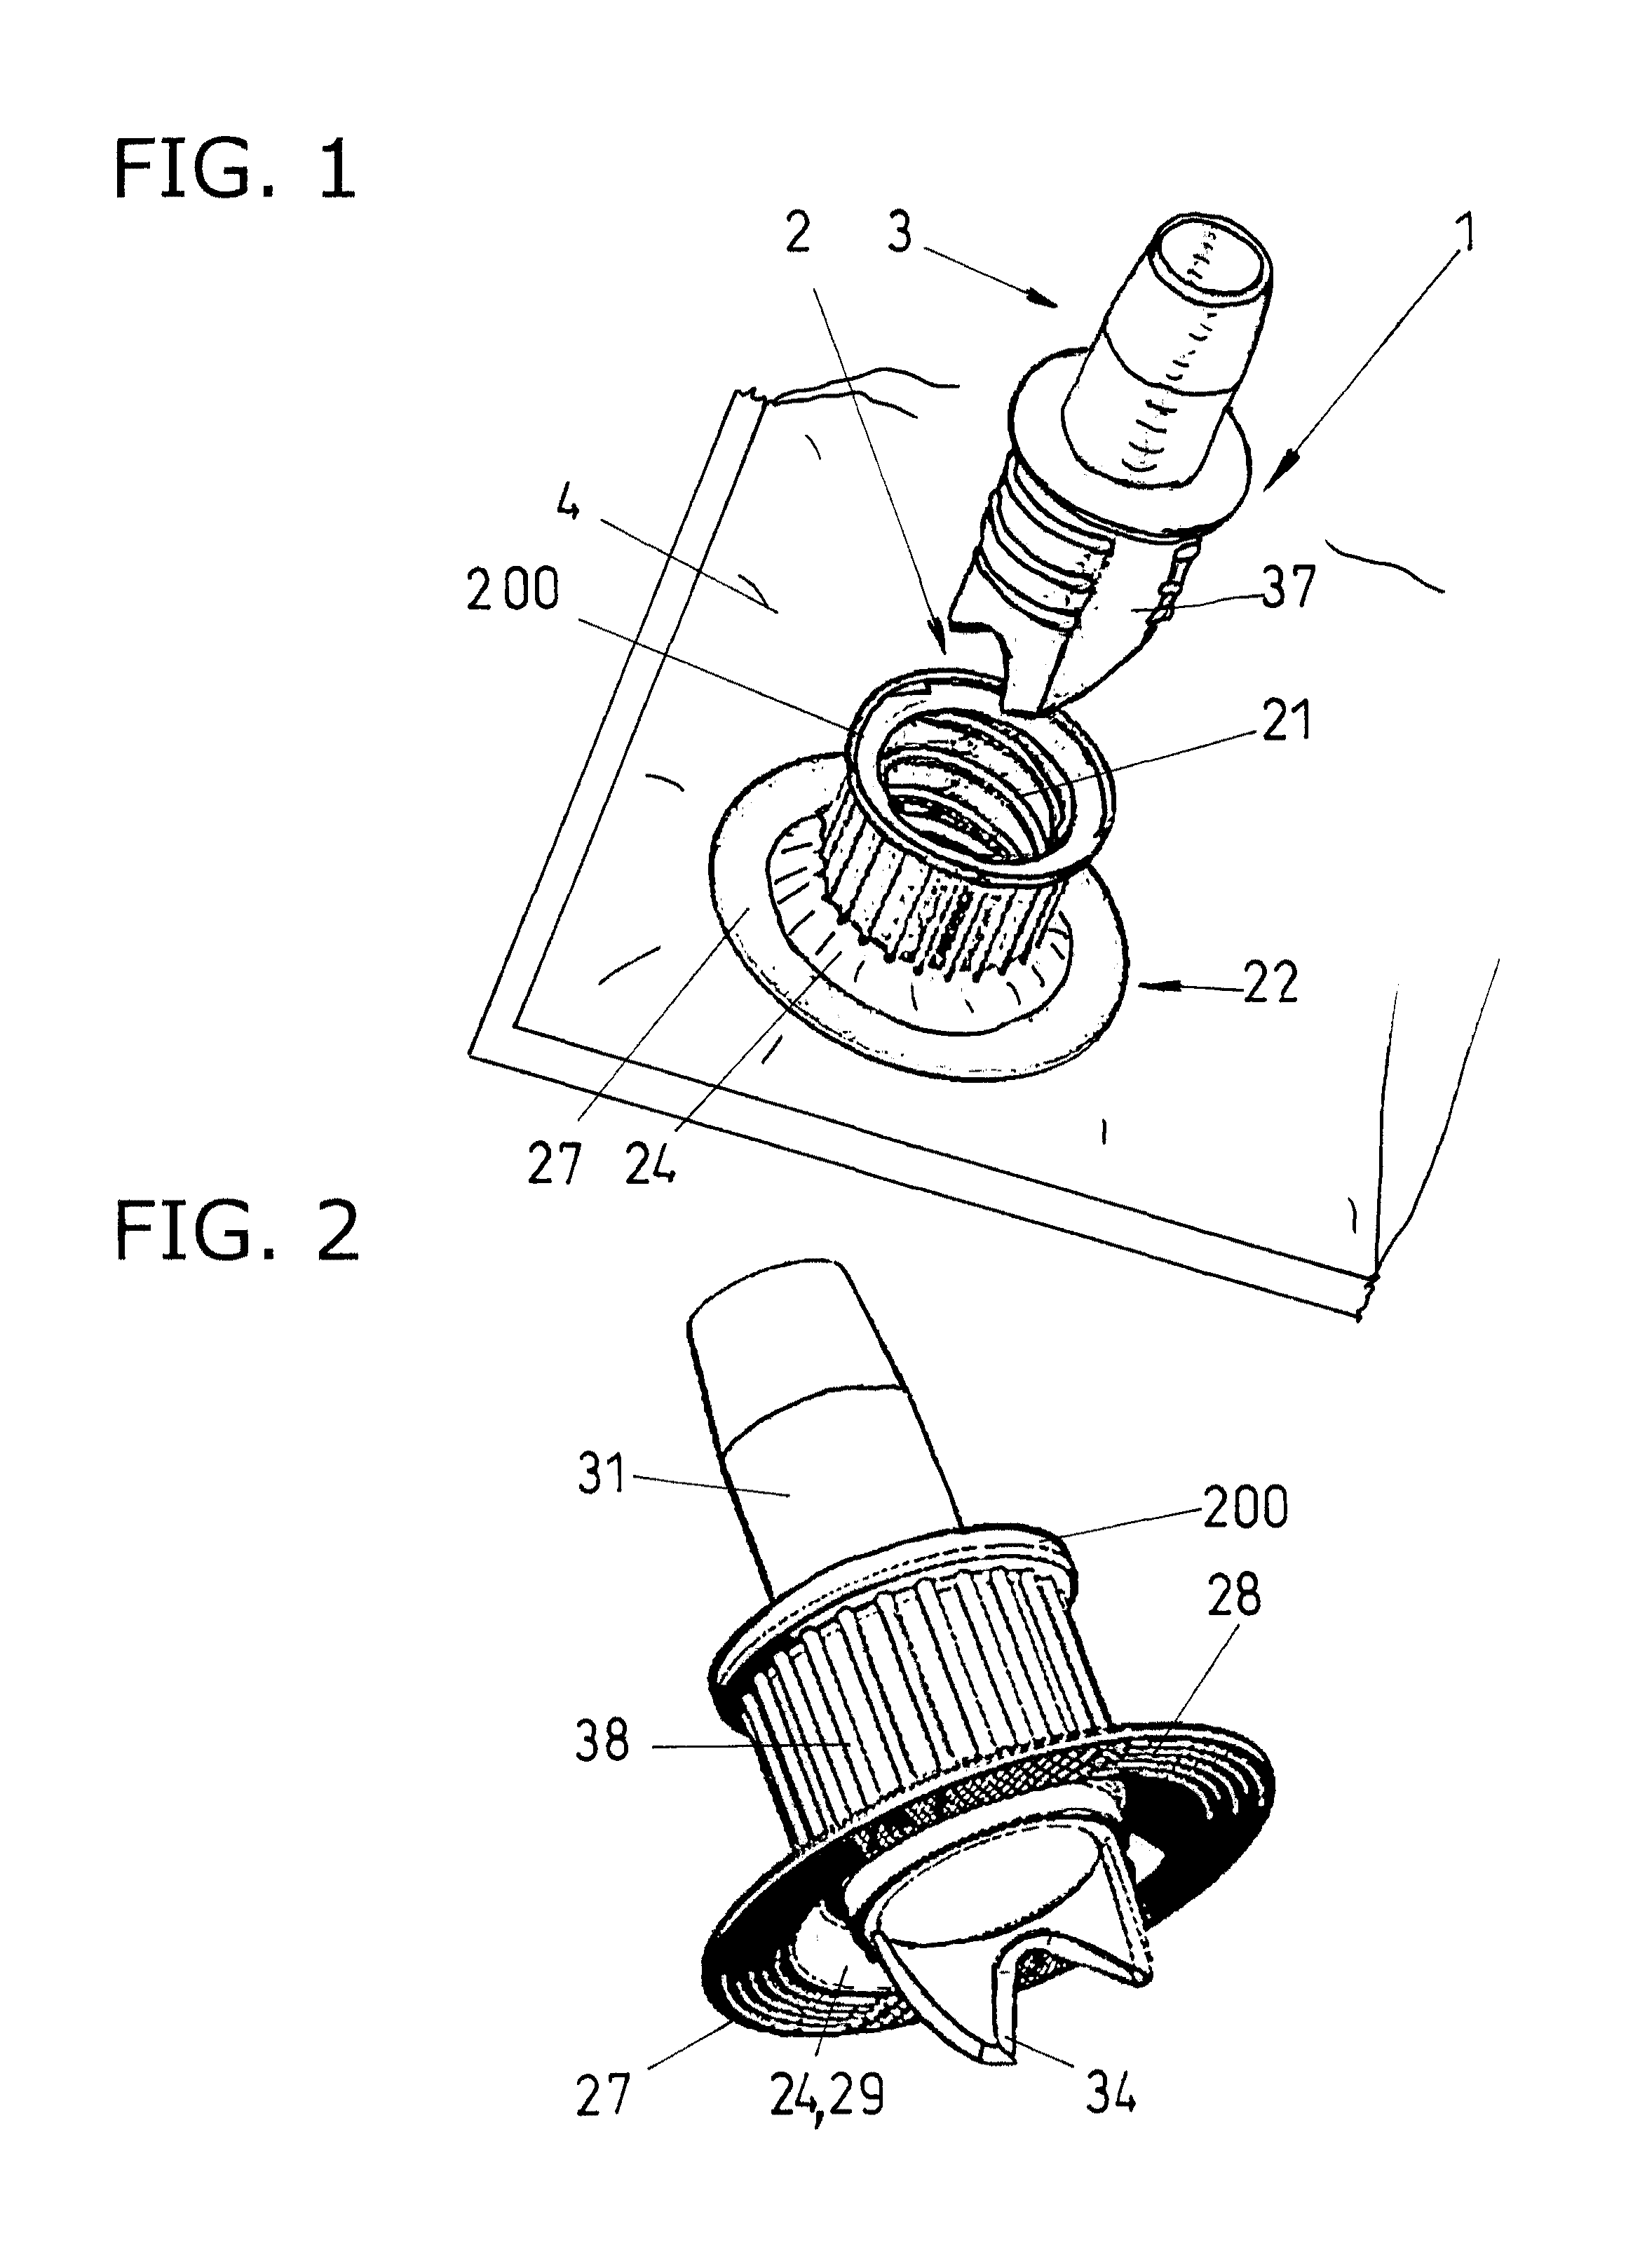 Closure with adapter